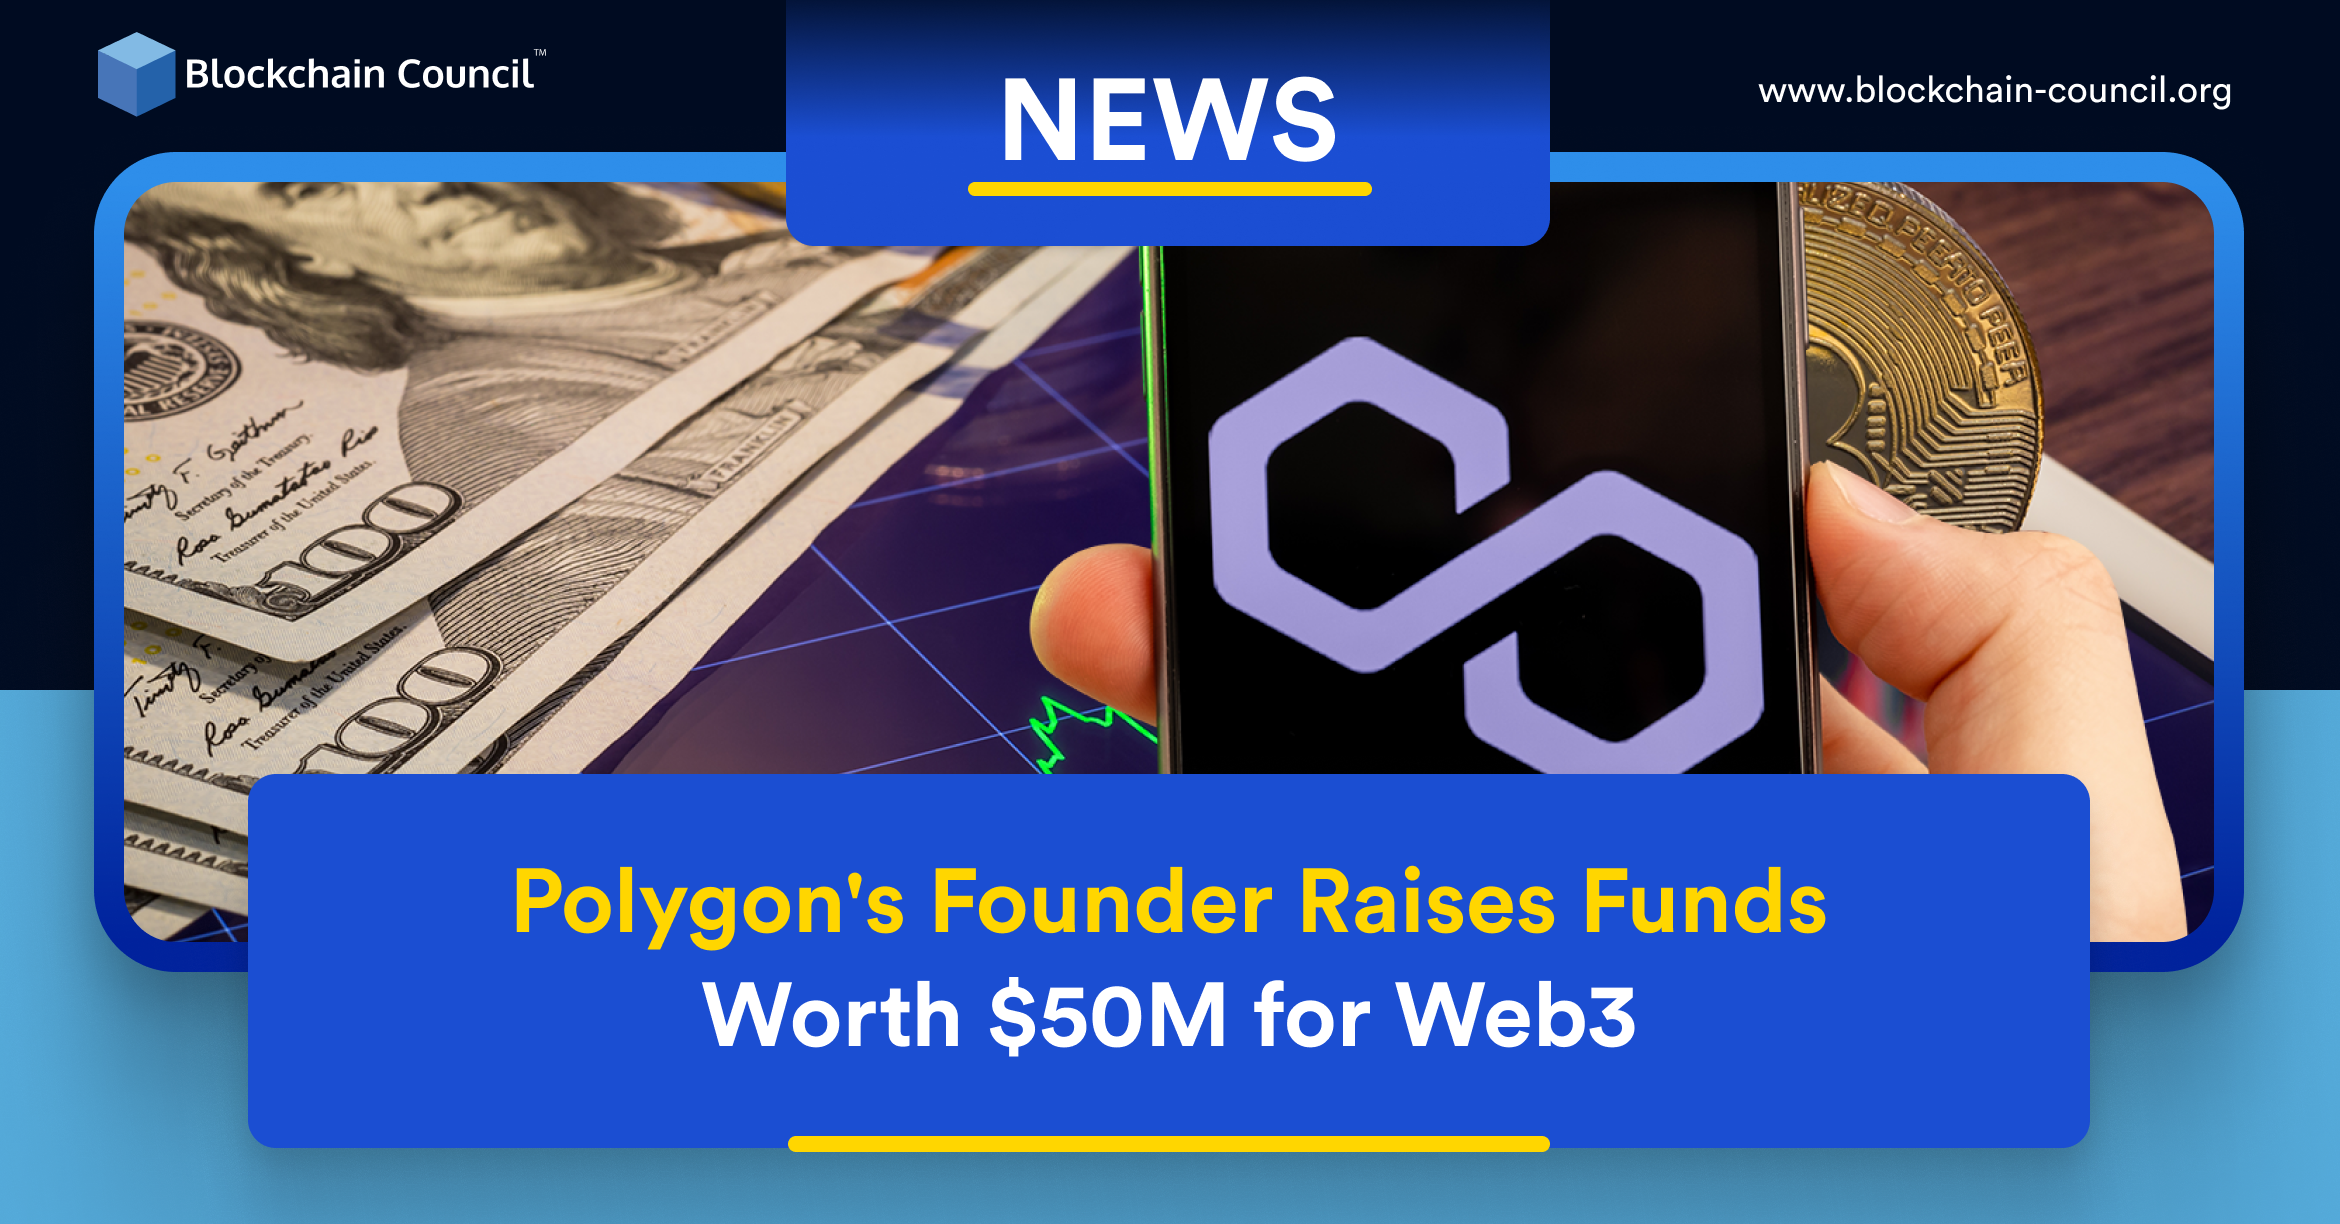 Polygon's Founder Raises Funds Worth $50M for Web3